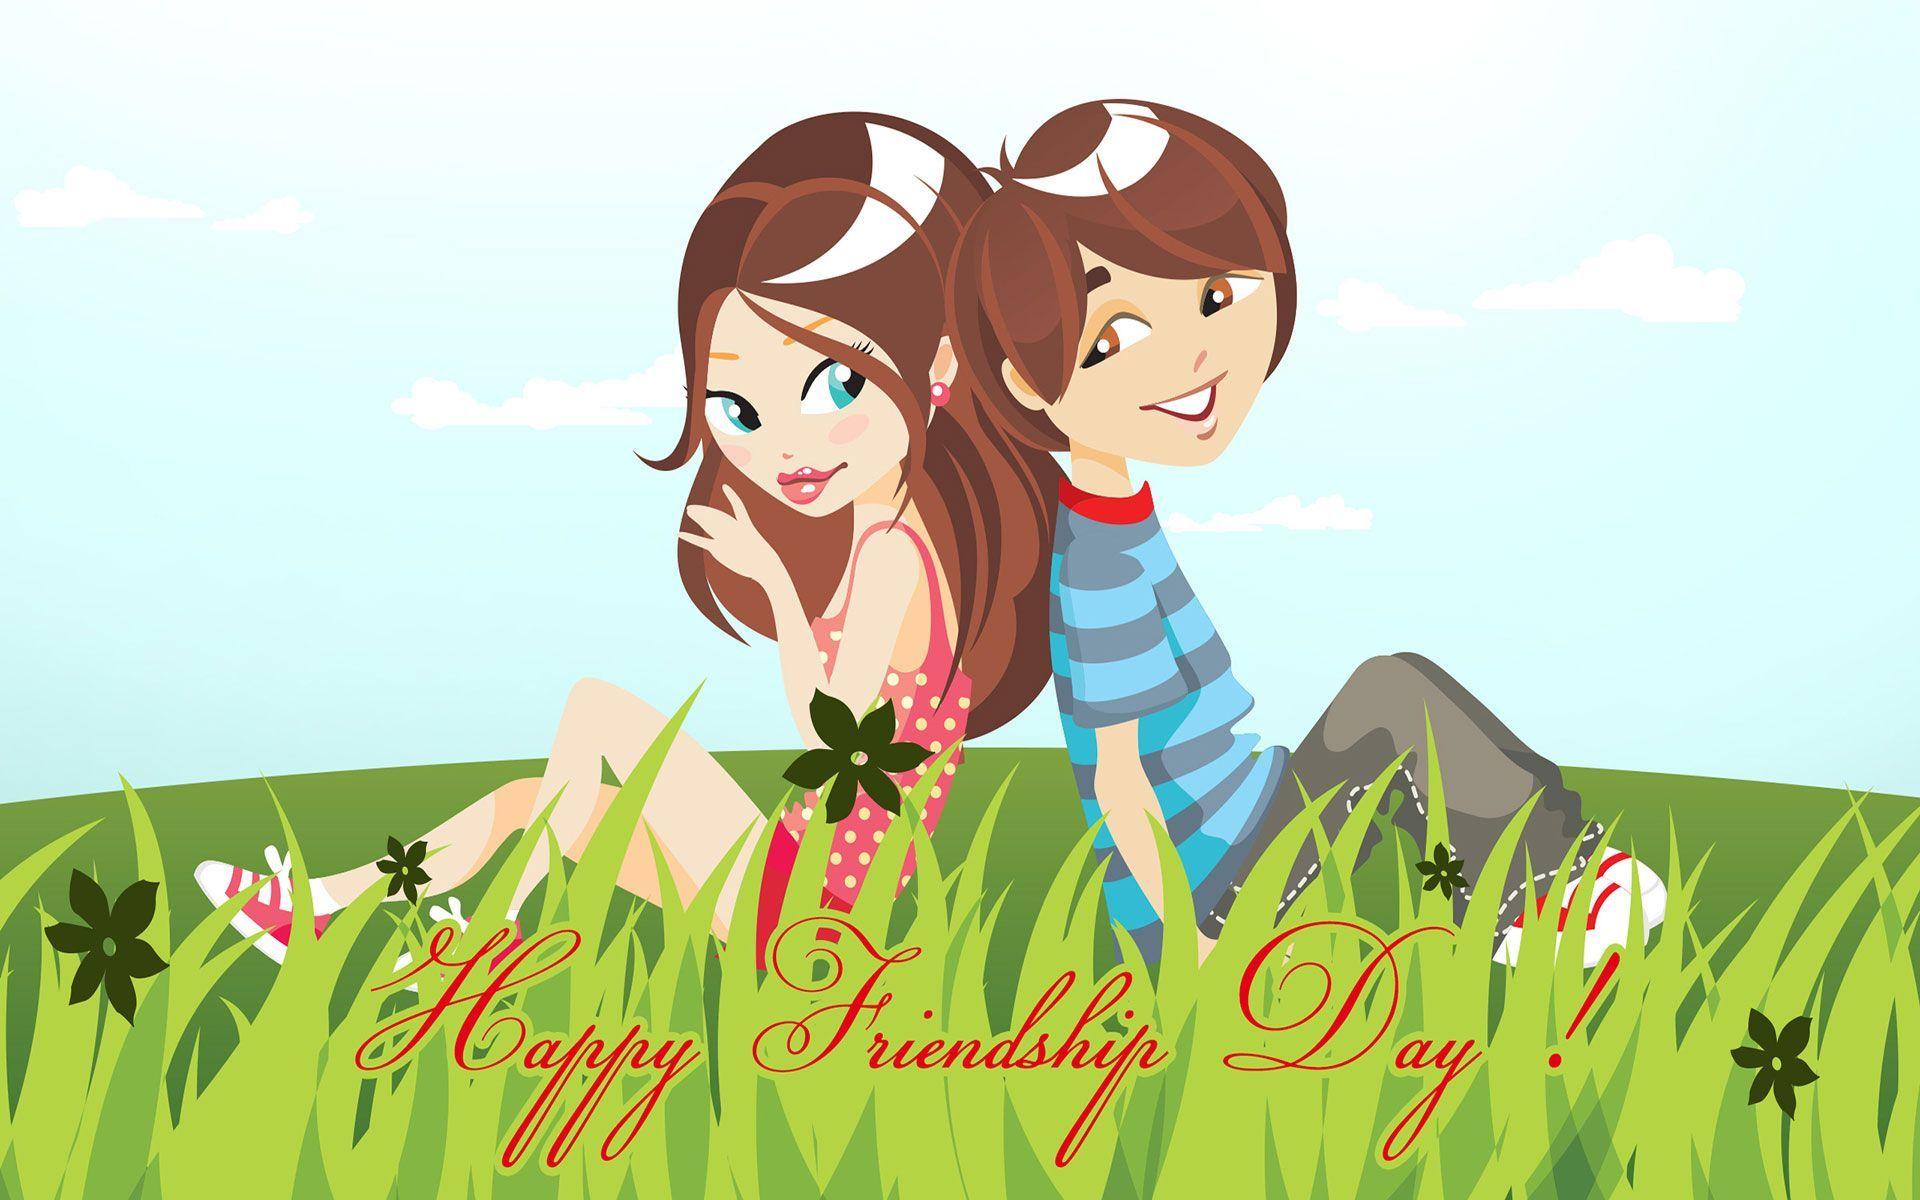 Happy Friendship Day Wallpaper with Quotes. Happy friendship day, Friendship day wallpaper, Girl cartoon